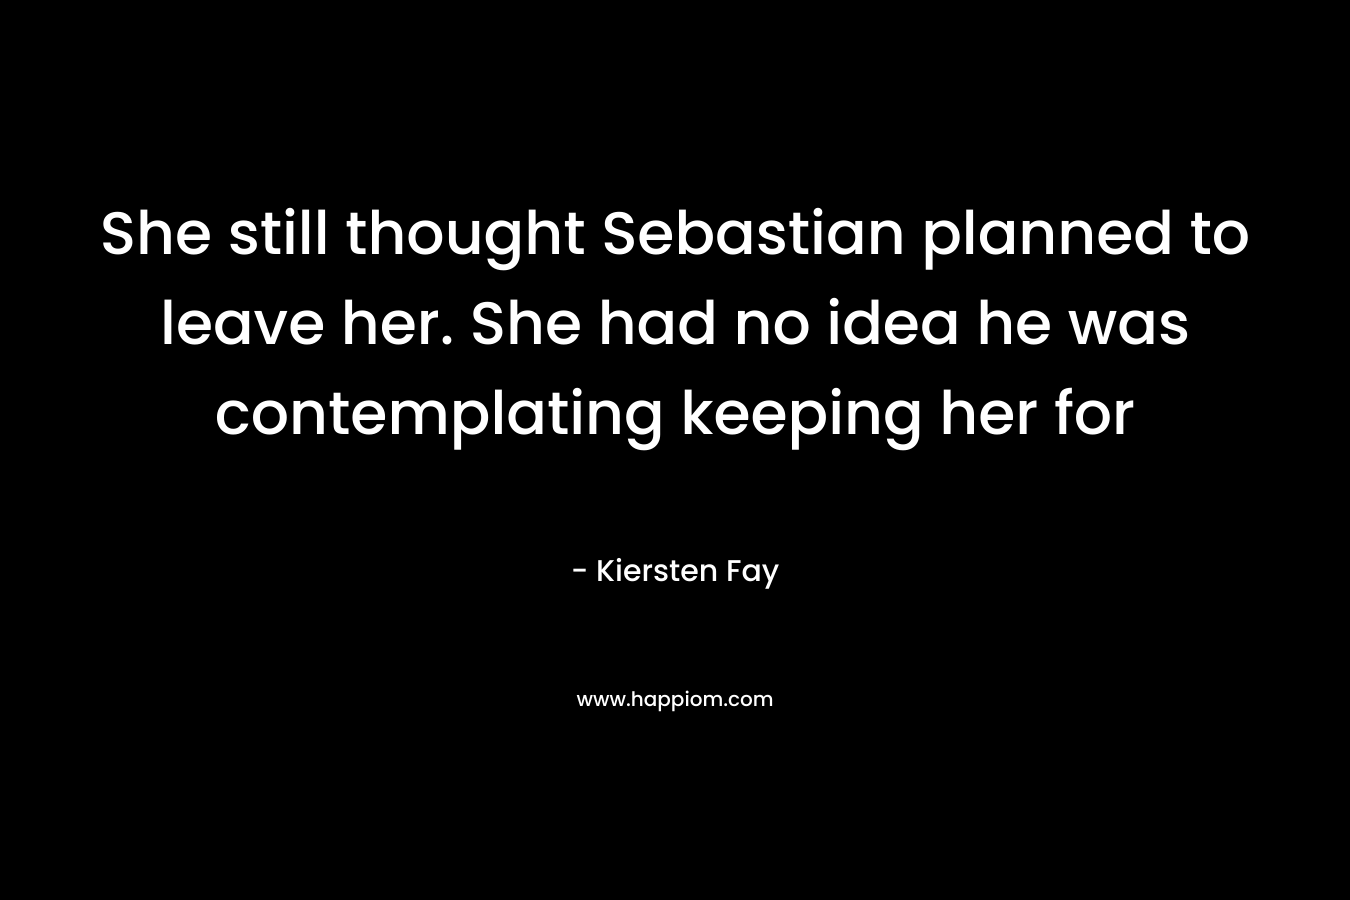 She still thought Sebastian planned to leave her. She had no idea he was contemplating keeping her for